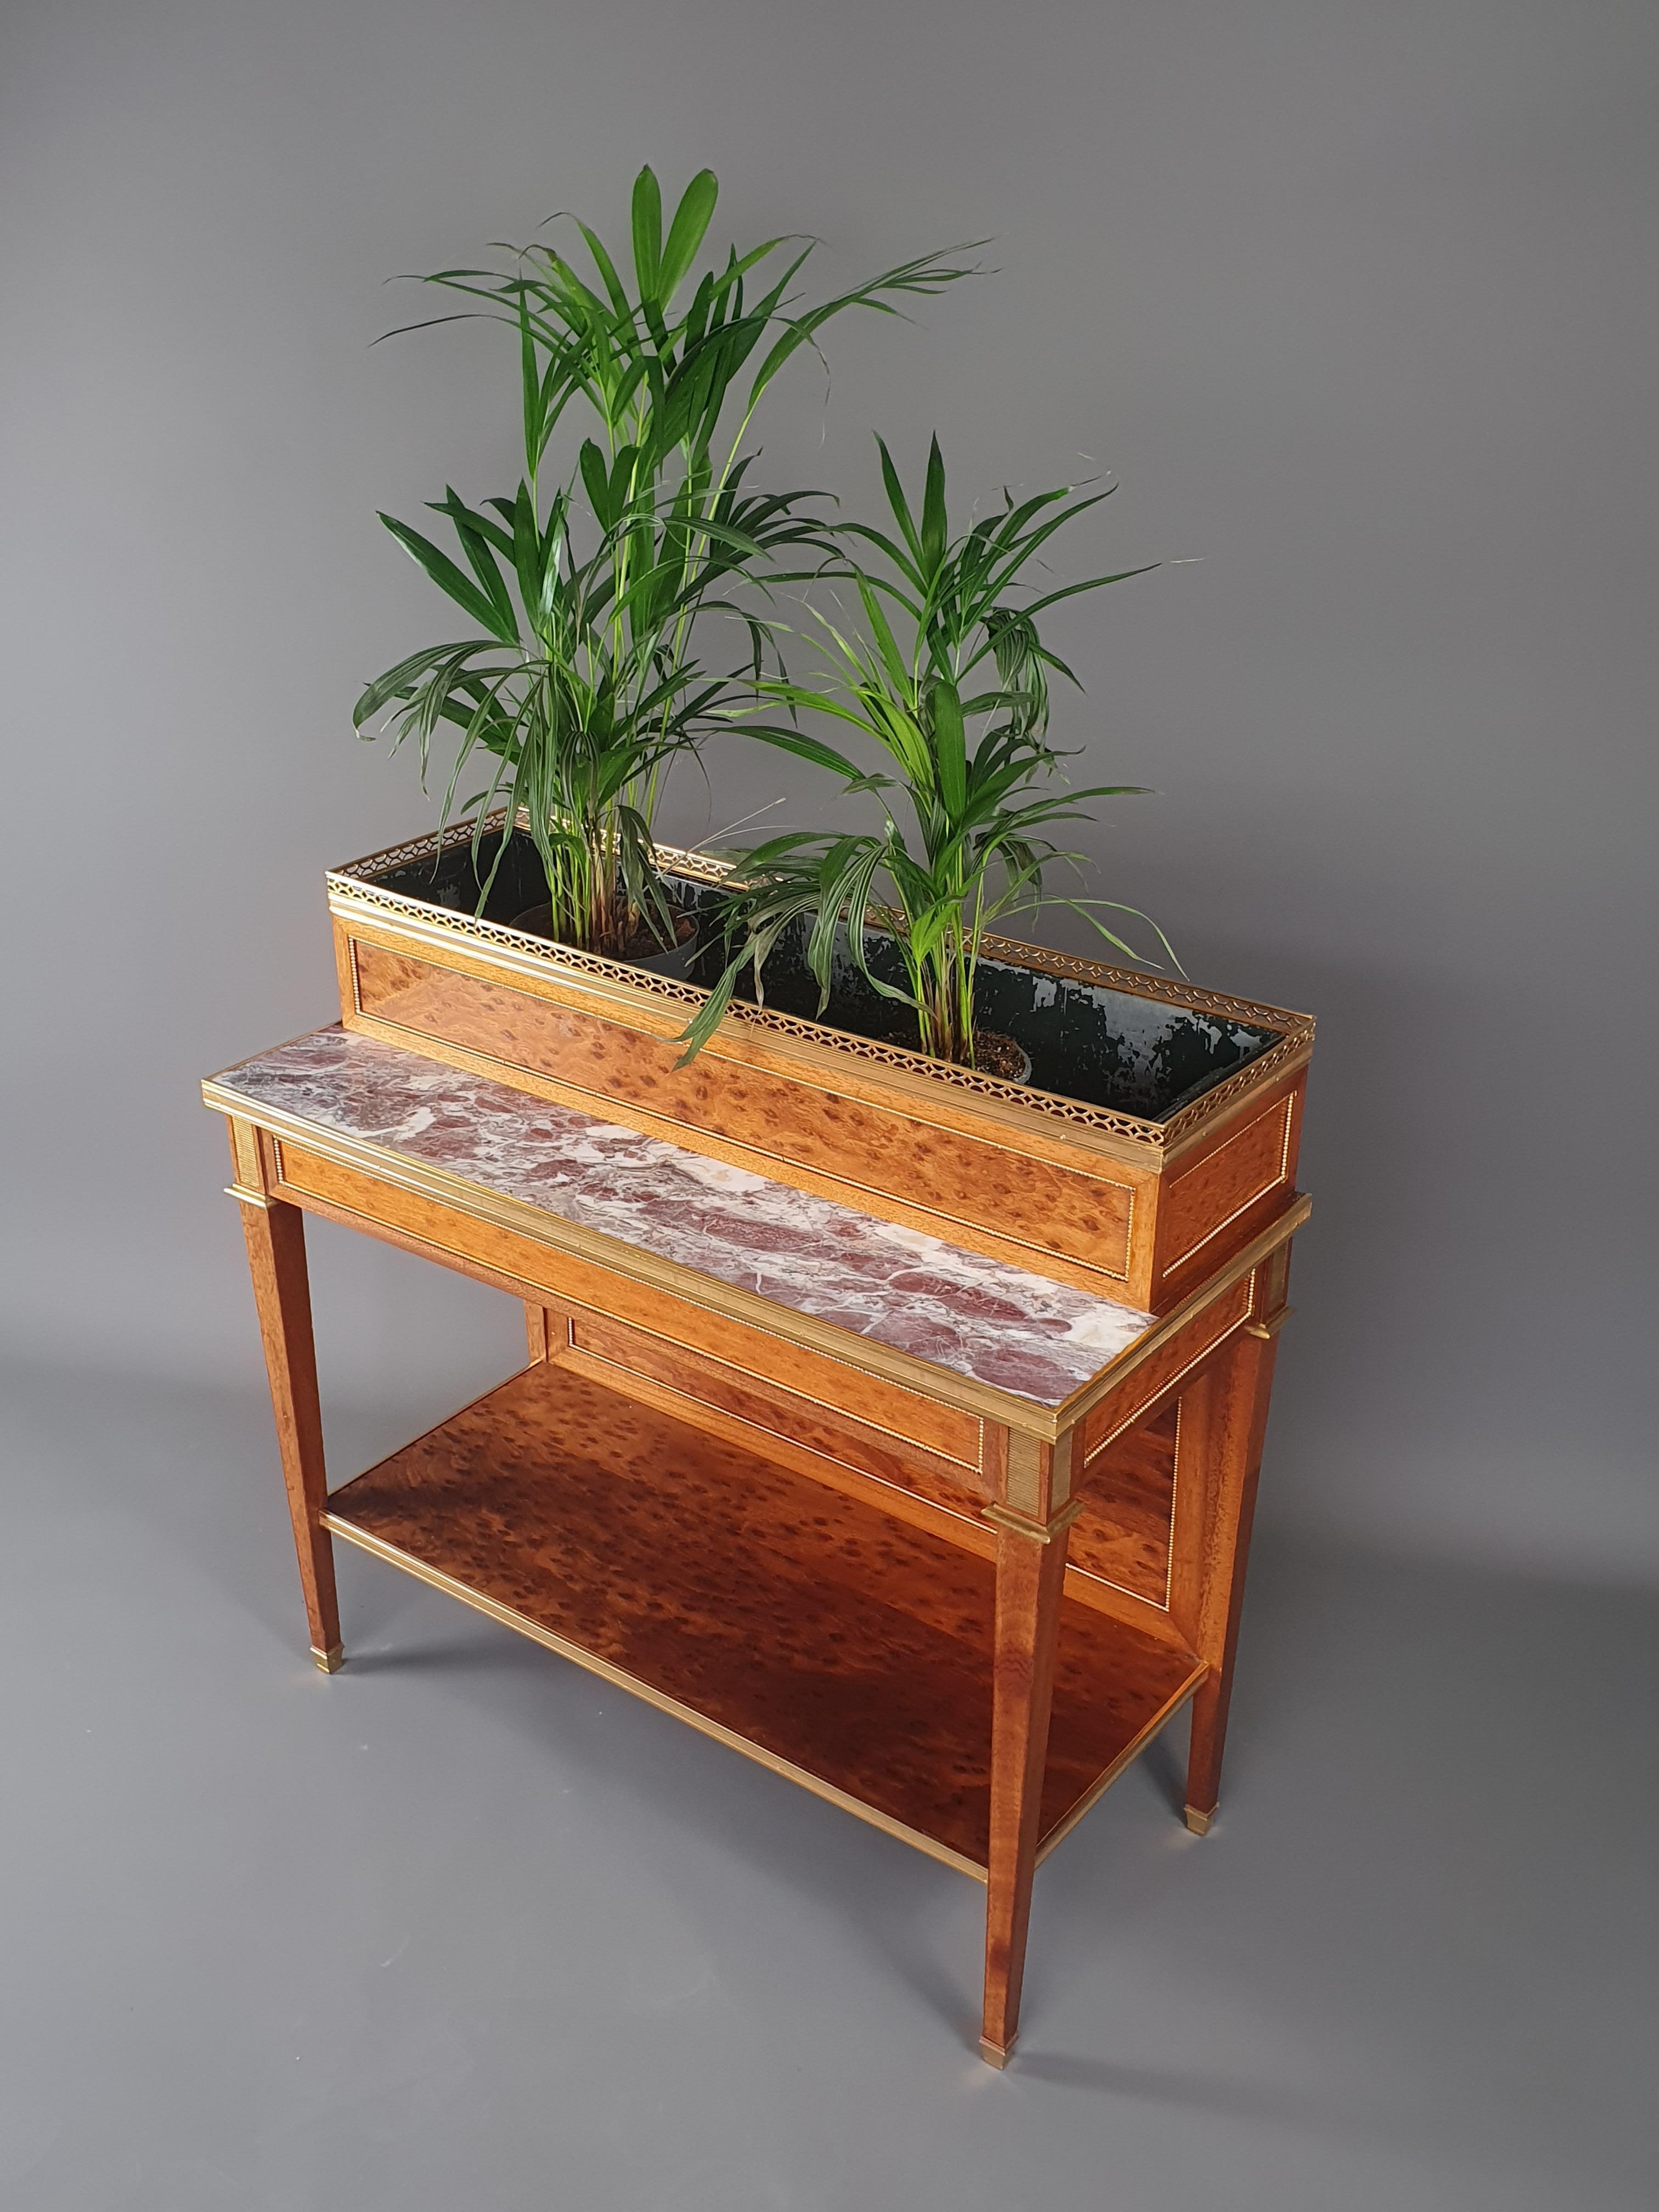 Interesting Louis XVI style planter in speckled mahogany veneer and gilded brass and bronze ornamentation.

Large zinc bench in the upper part and violet marble top in the front to present a floral composition on two levels.

All sides finish